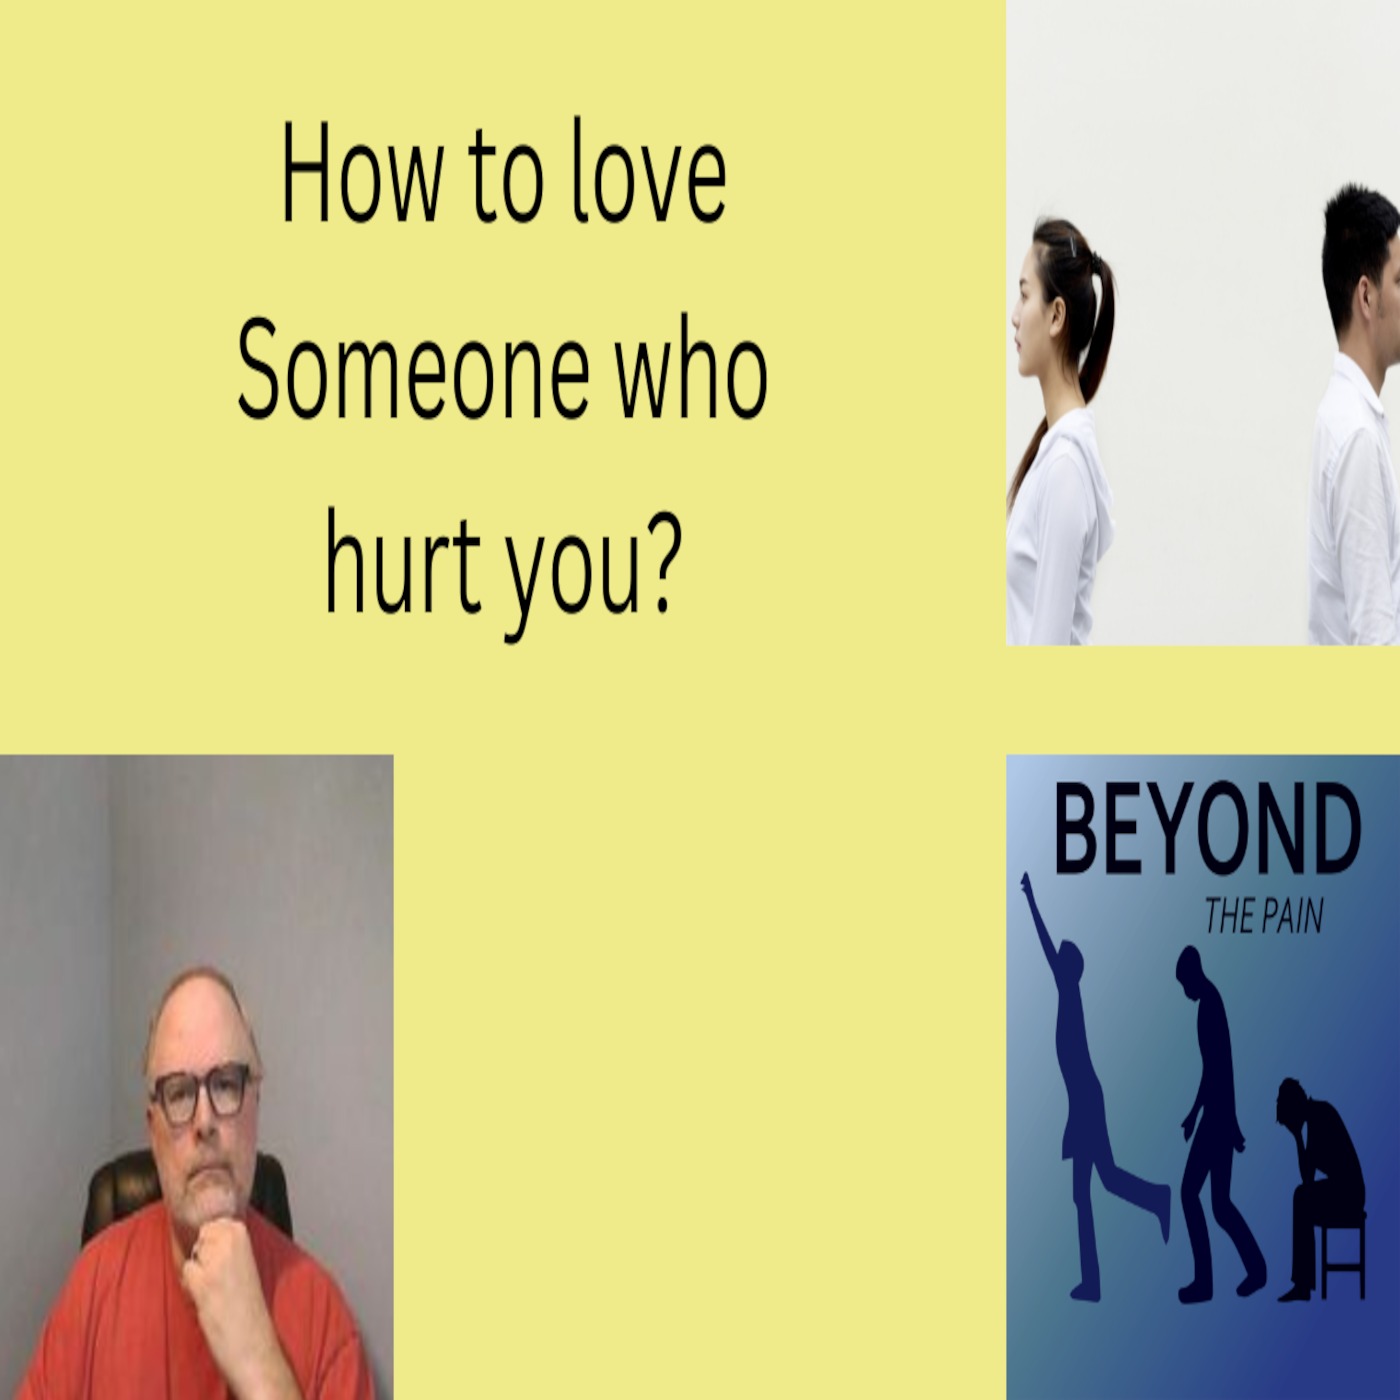 How do you love someone that hurt you?